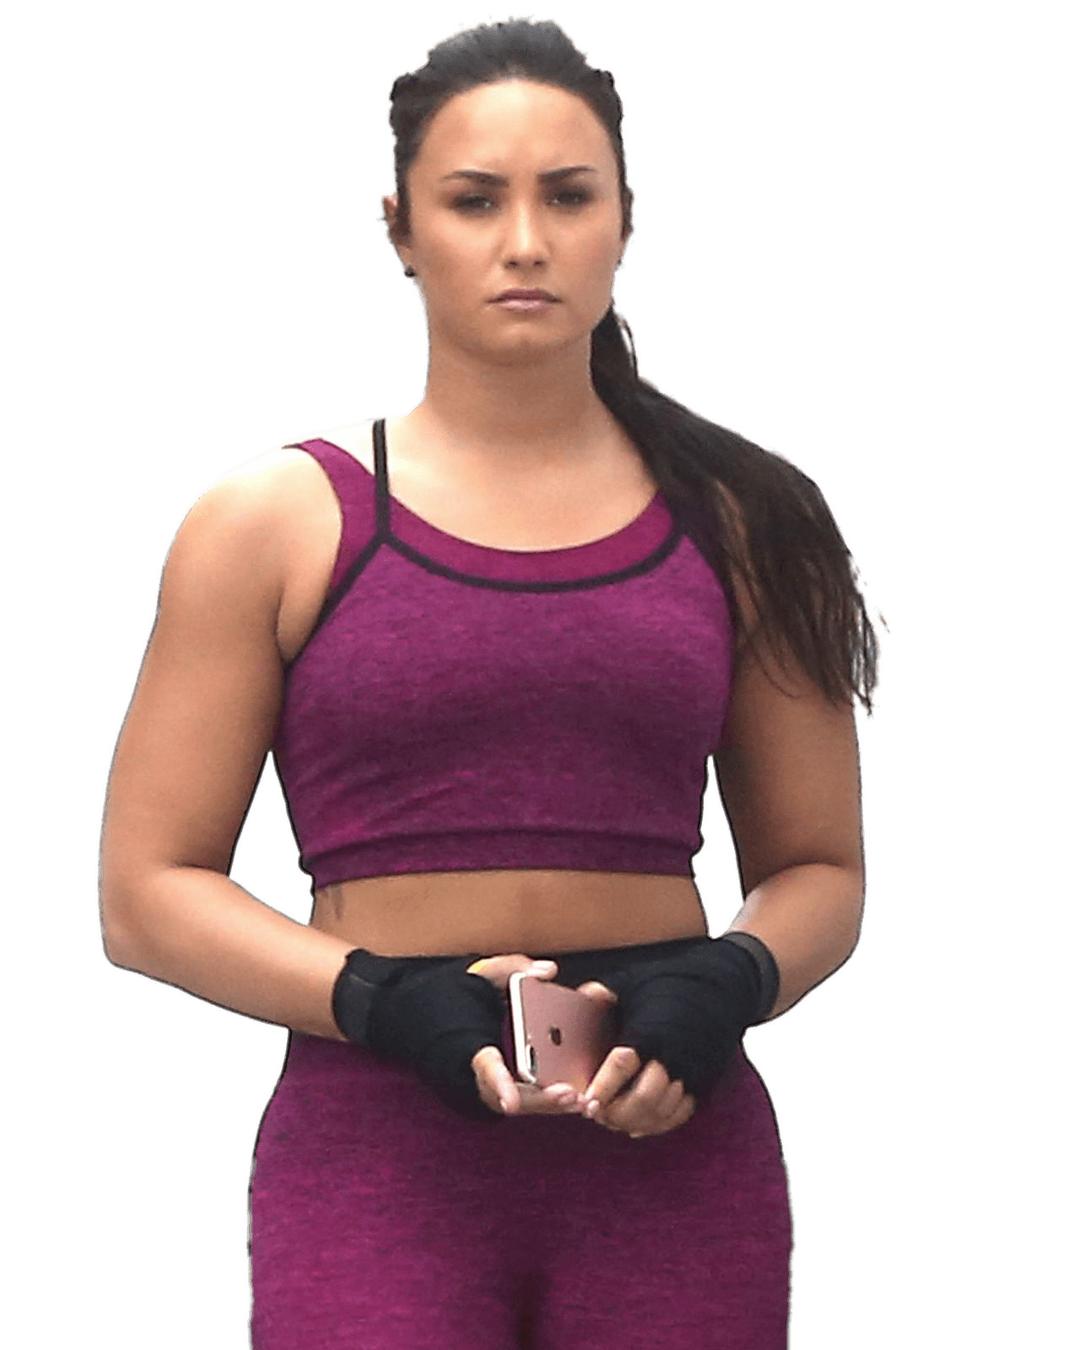 Demi Lovato Fitness Outfit png transparent